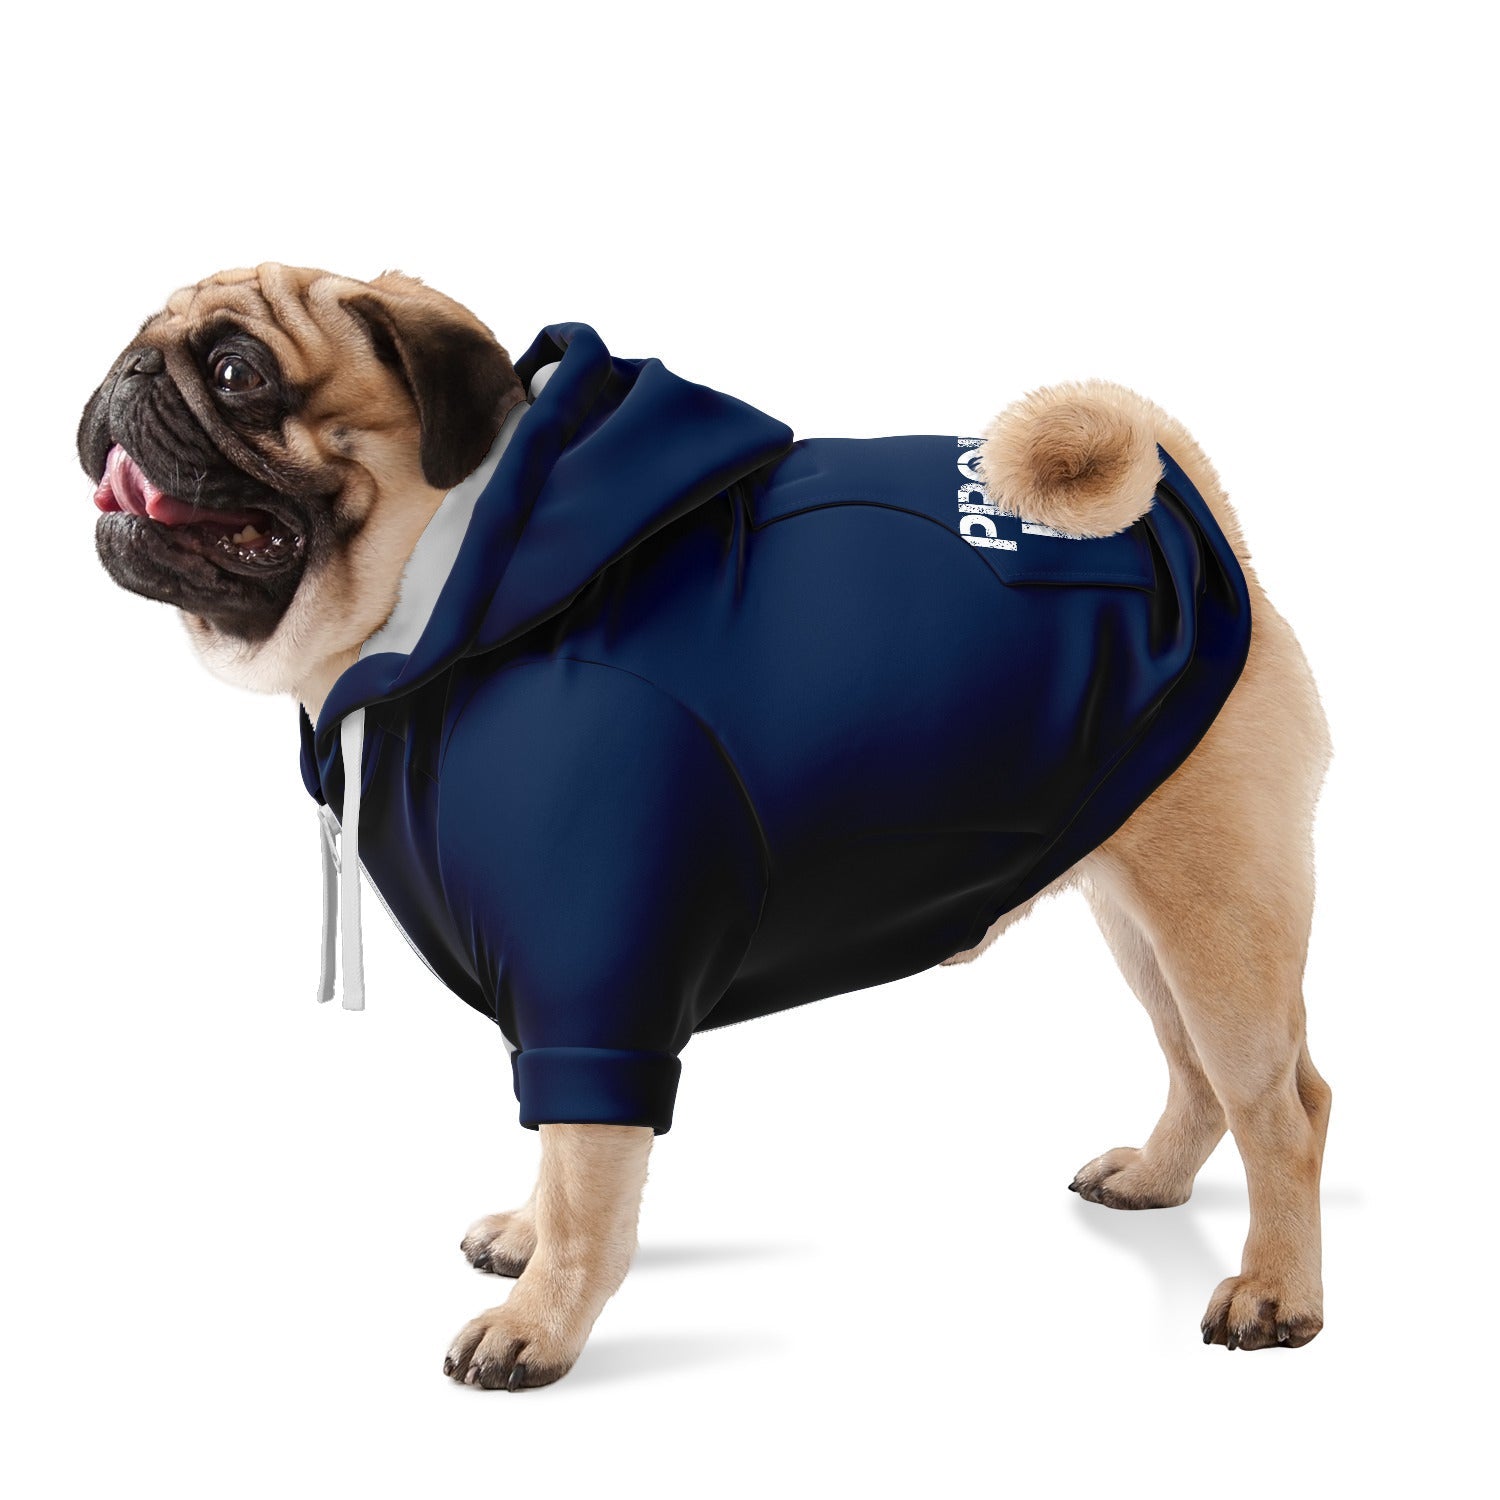 Professional Butt Sniffer - Dog Hoodie - Doggy Drip Shop